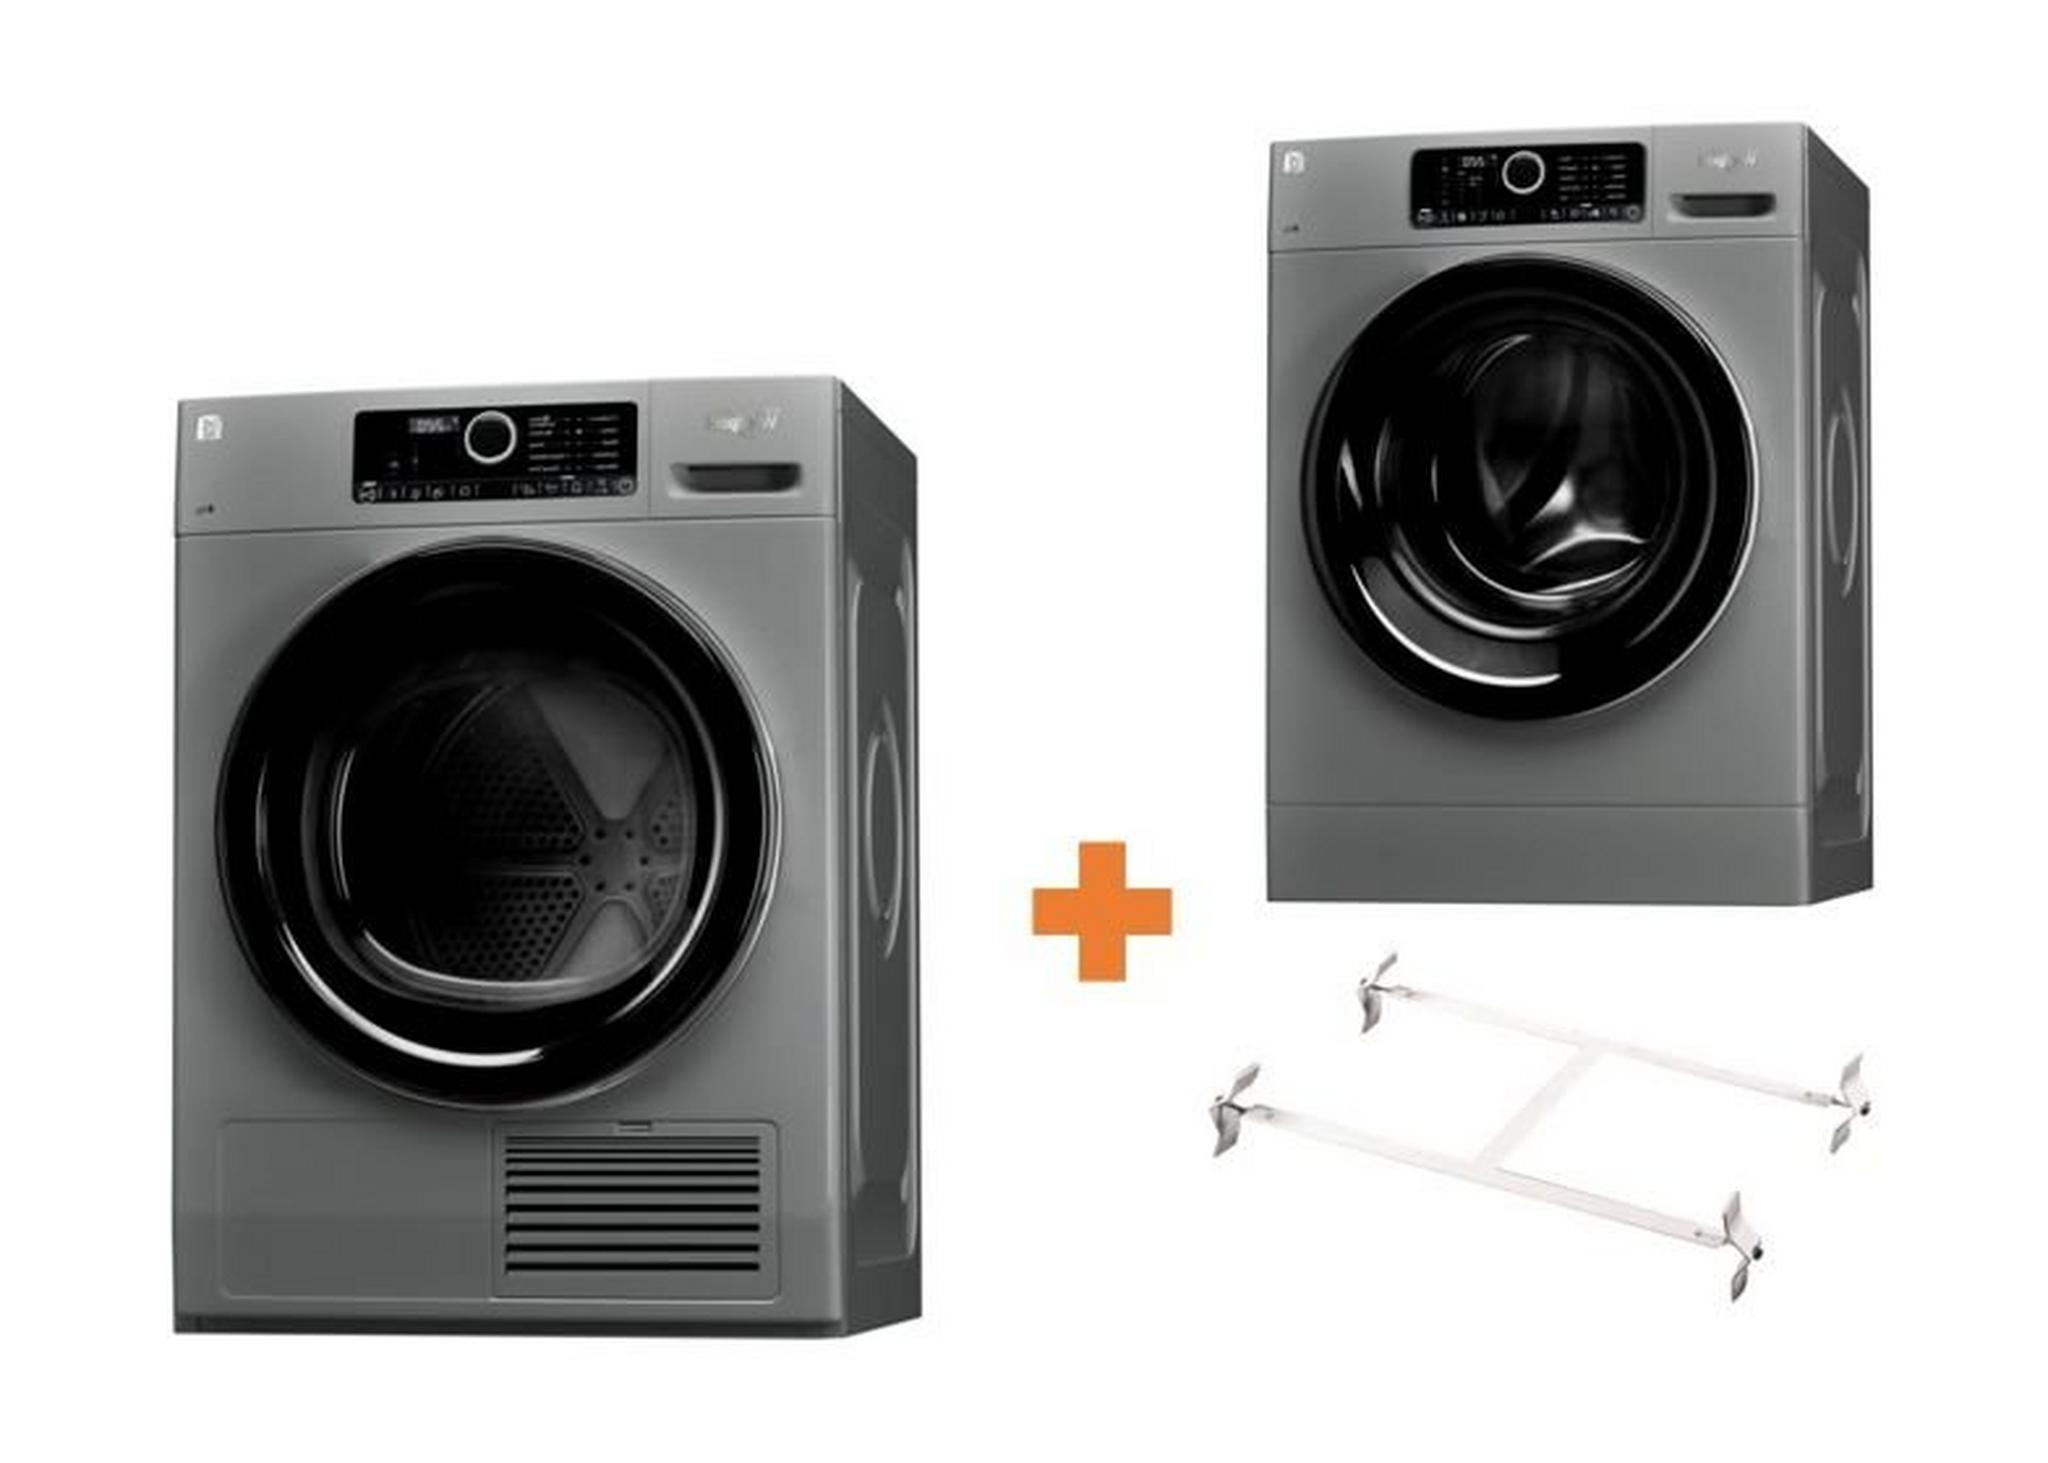 Whirlpool Front Loader Washer 8kg Silver + Whirlpool 8 Kilogram Dryer Condenser + Wansa Washer and Dryer Stacking Unit